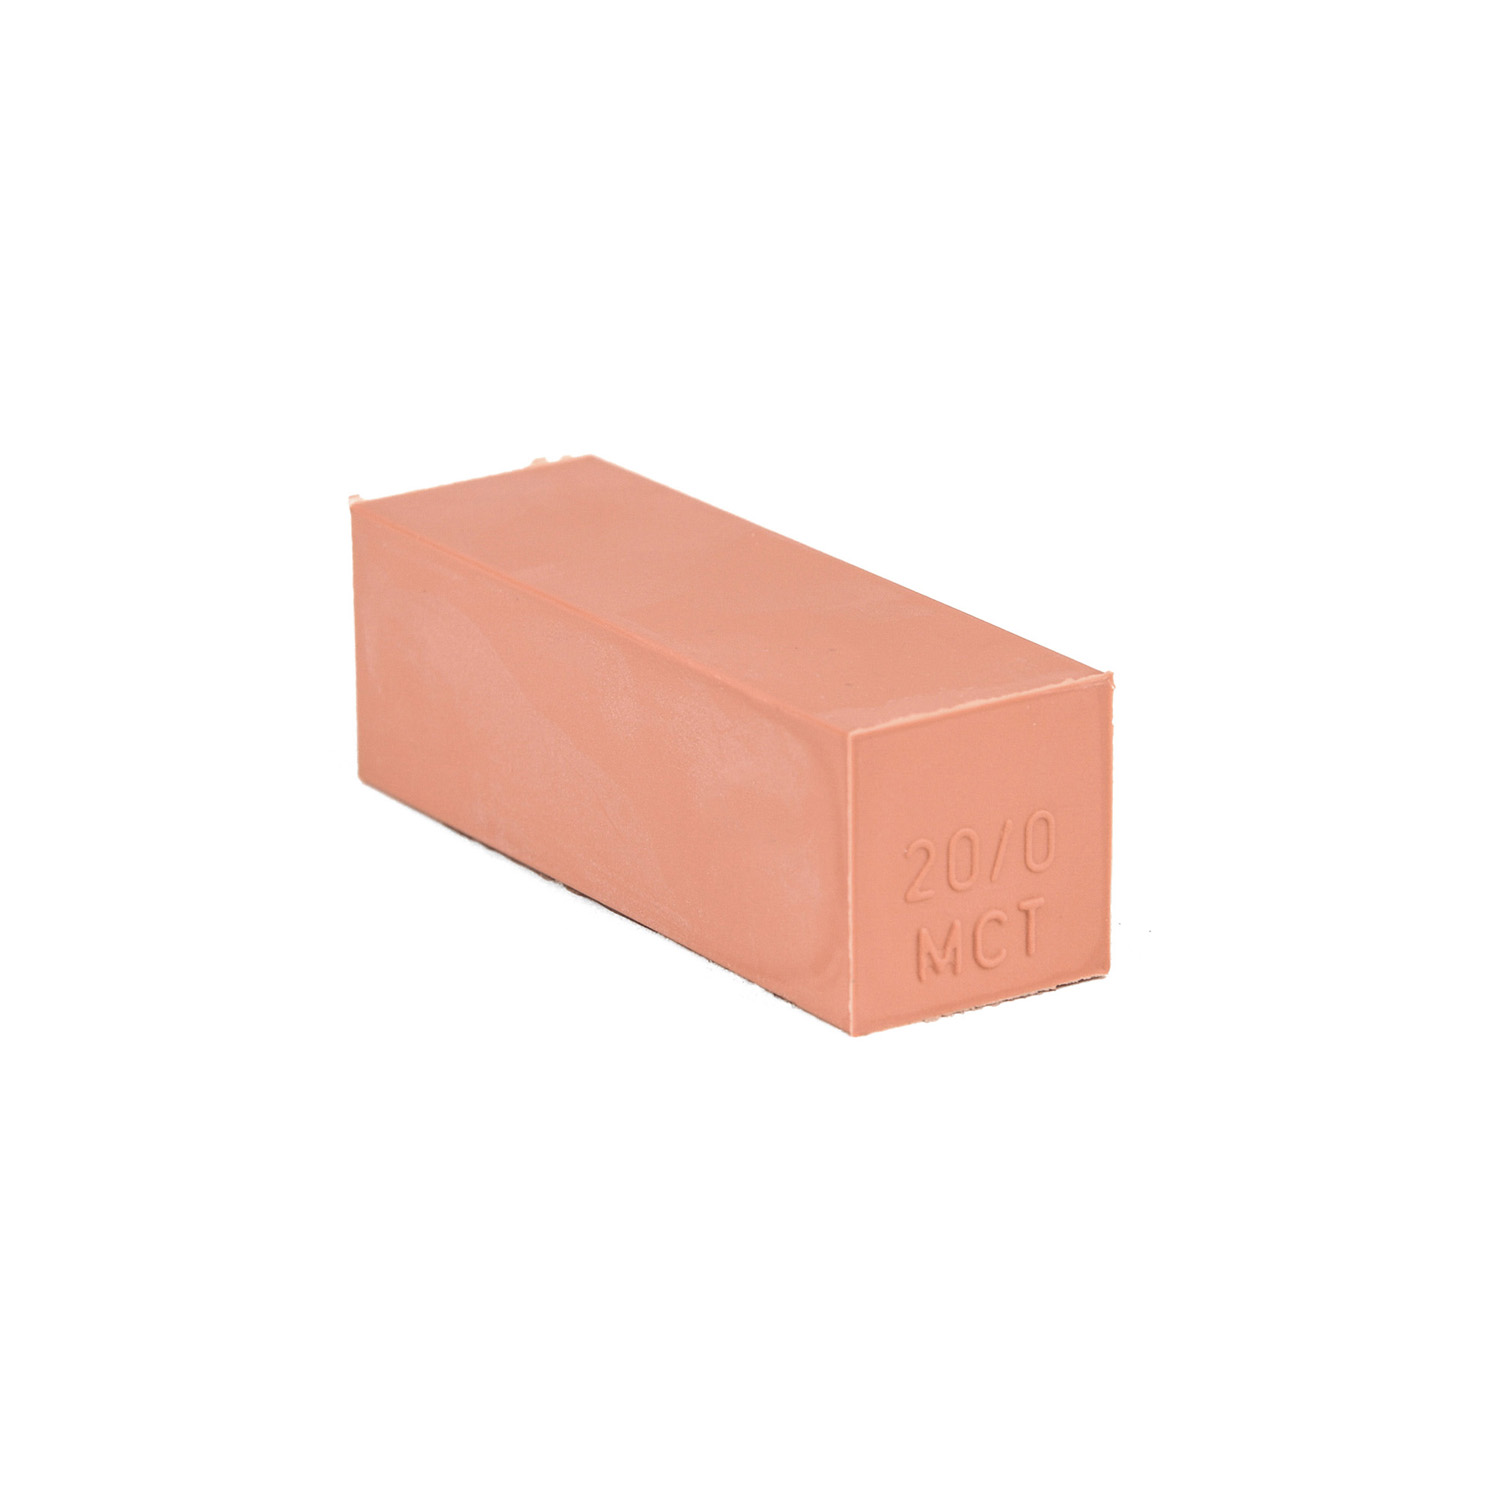 20-0 Spare block lycron, 20-0 solid block size 20x20mm